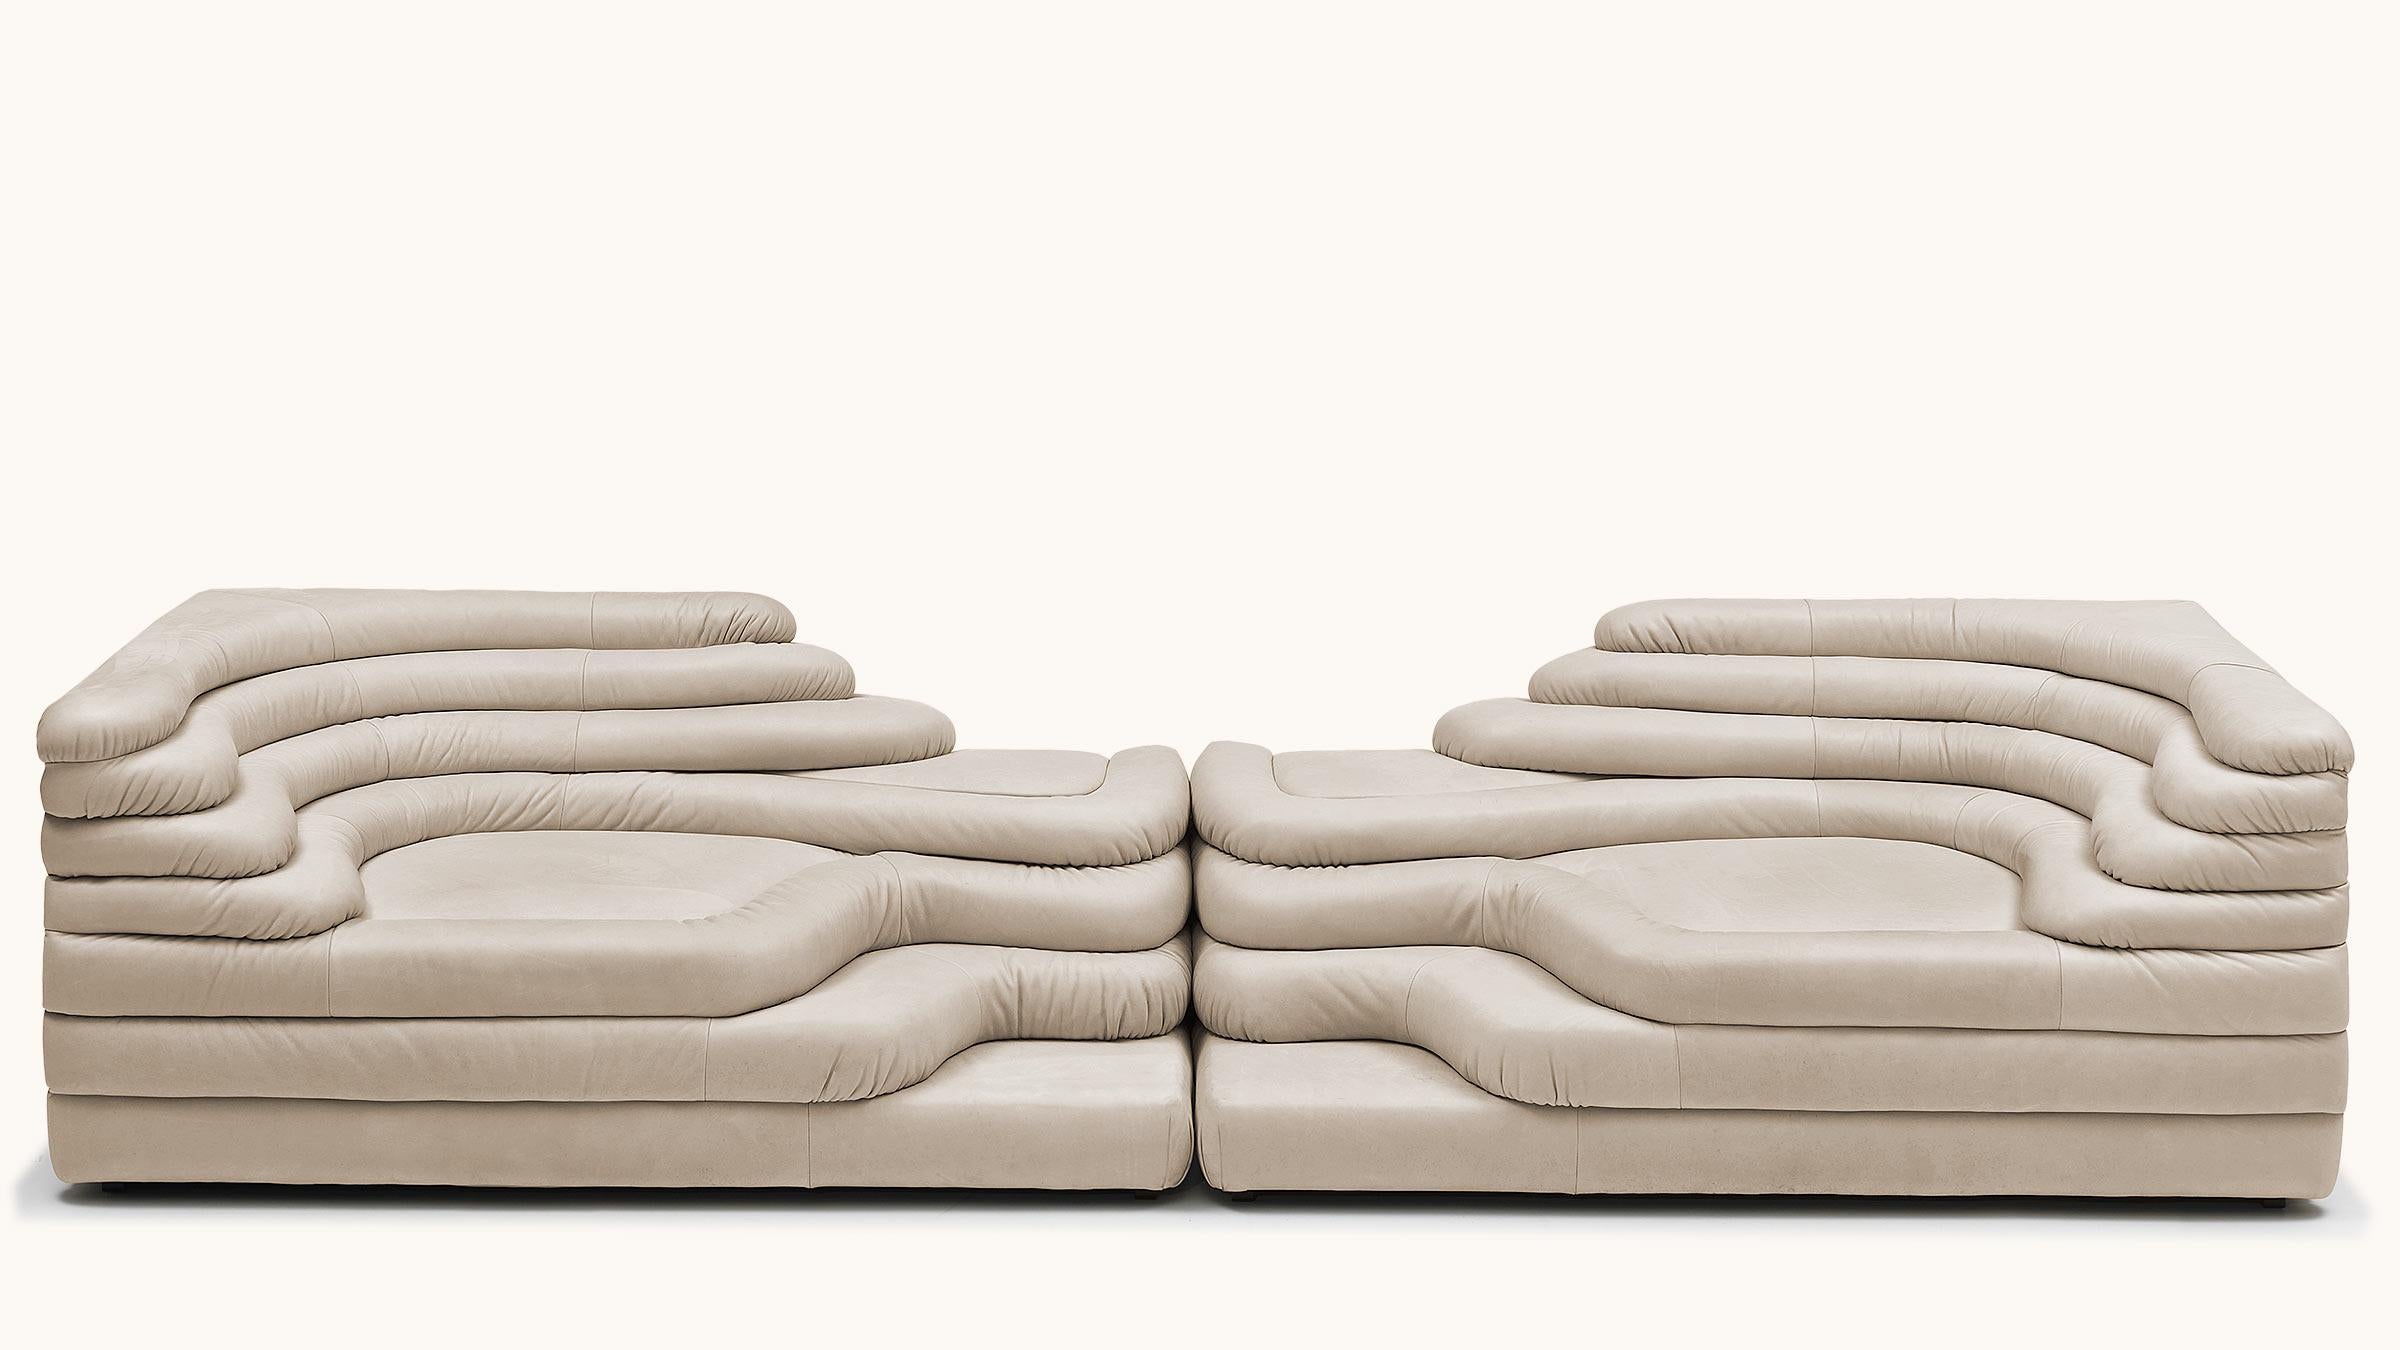 Contemporary De Sede DS-1025/09 Terrazza Sofa in Perla Upholstery by Ubald Klug, 1 Element For Sale